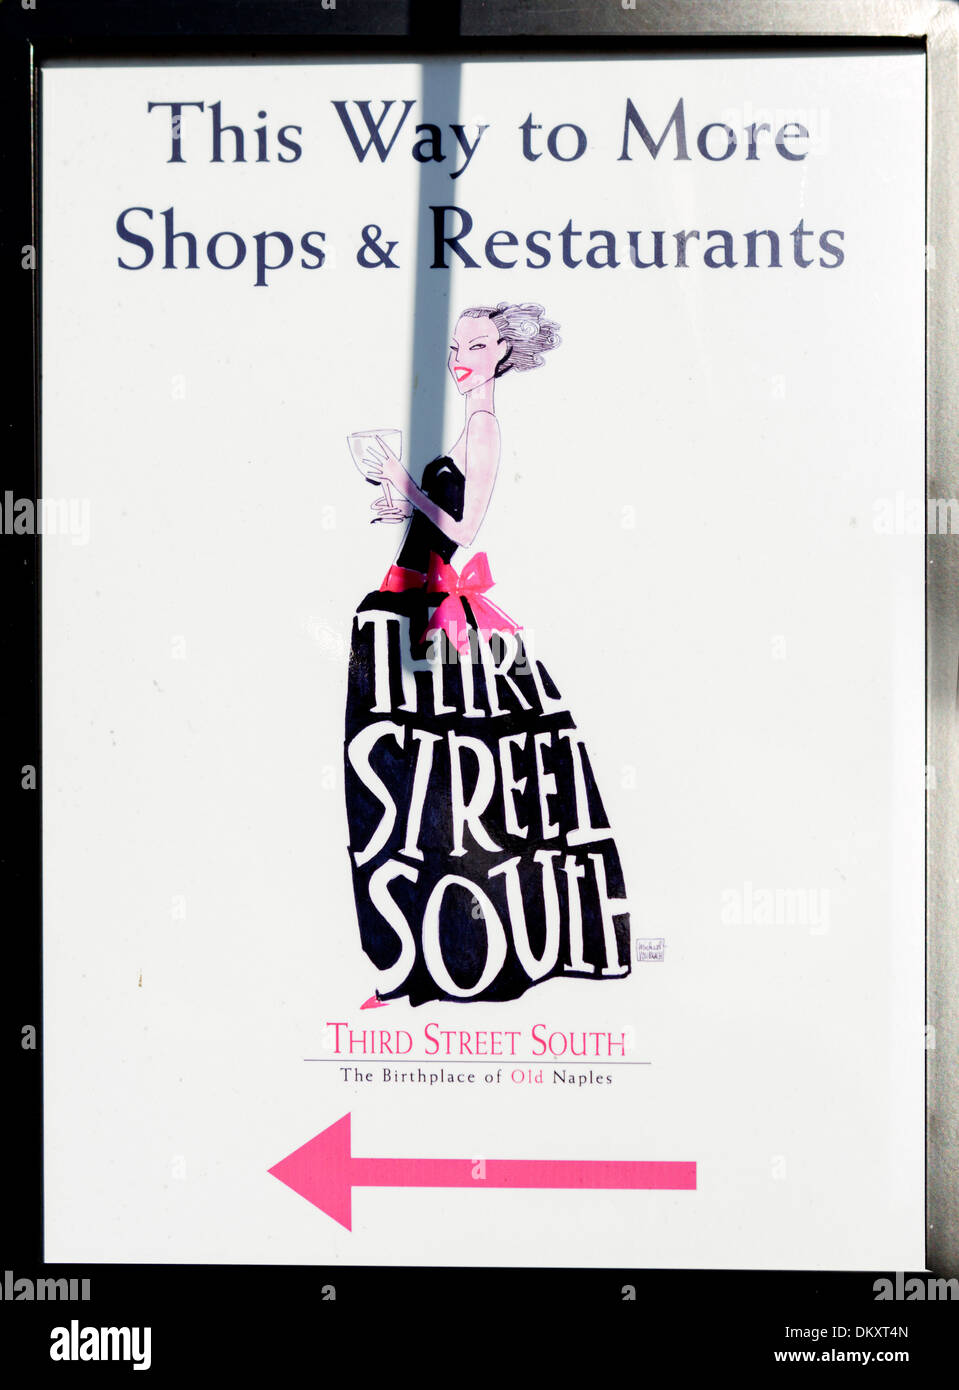 Sign advertising shops and restaurants on Third Street South in downtown Naples, Gulf Coast, Florida, USA Stock Photo